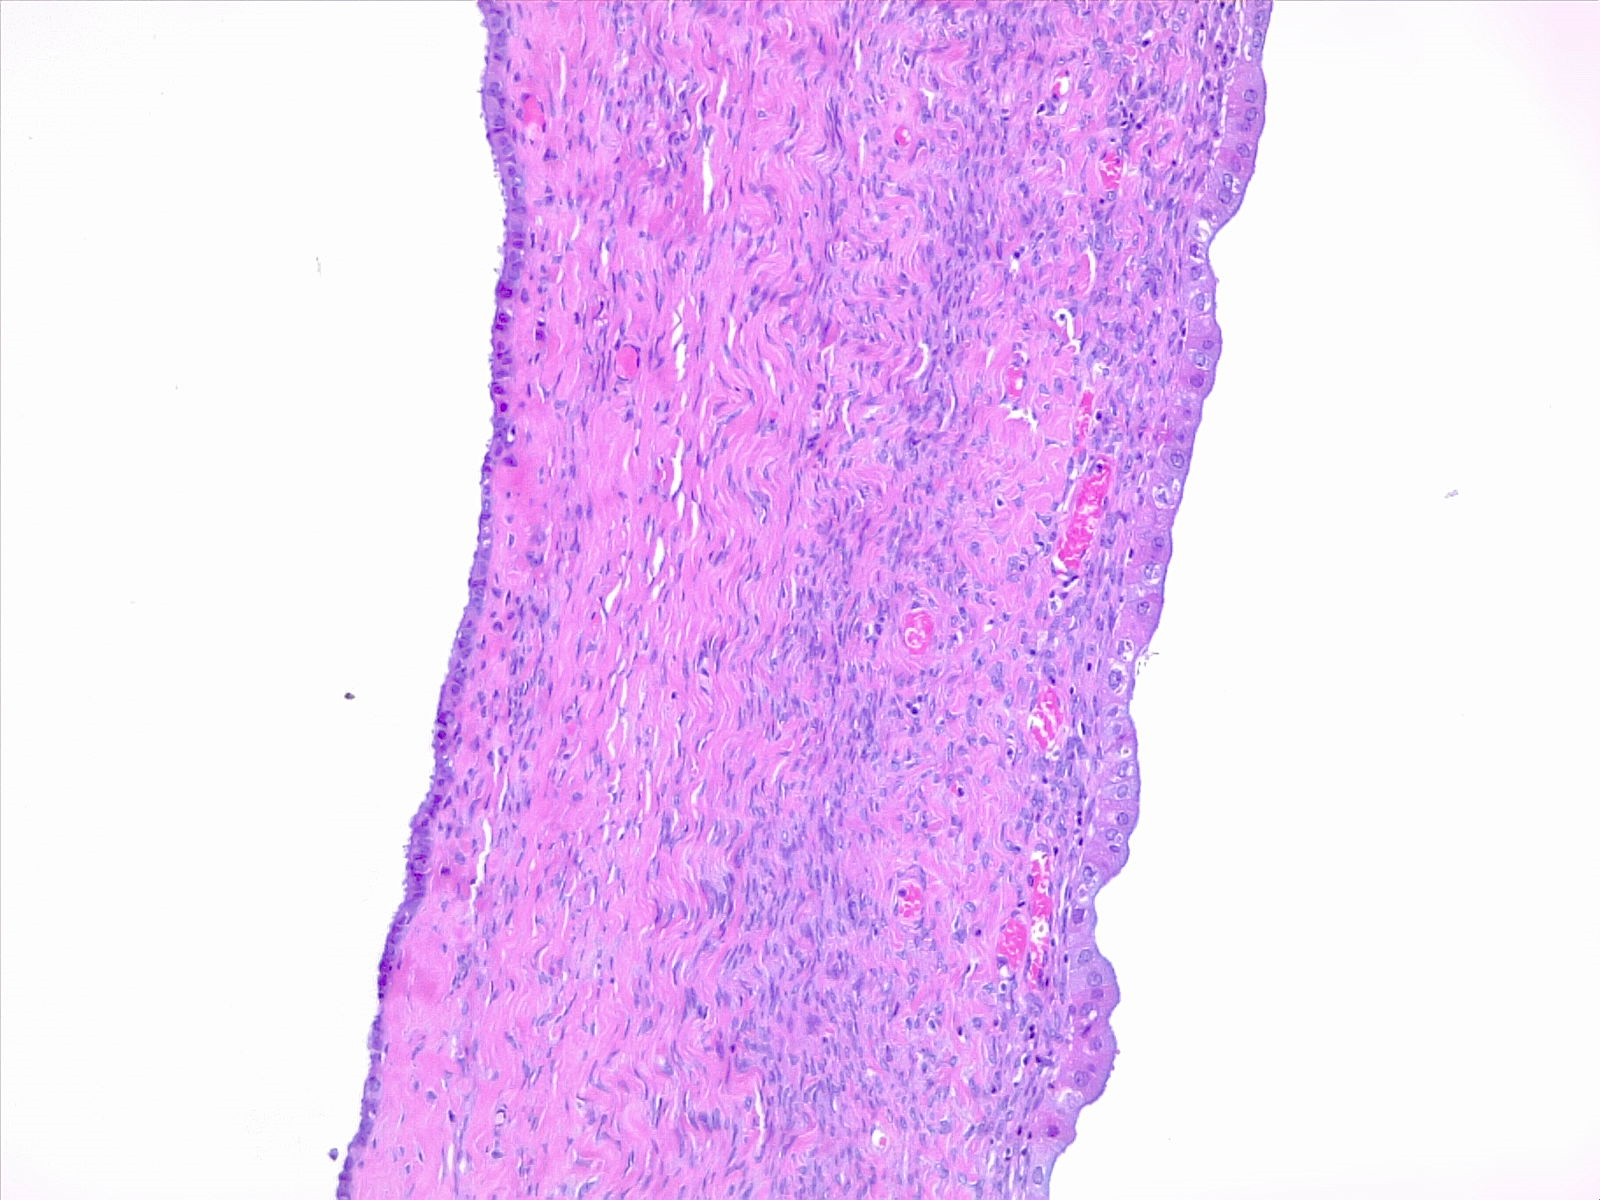 Serous cystadenoma, multiloculated cyst wall with monostratified serous epithelium. 10x H/E stain.